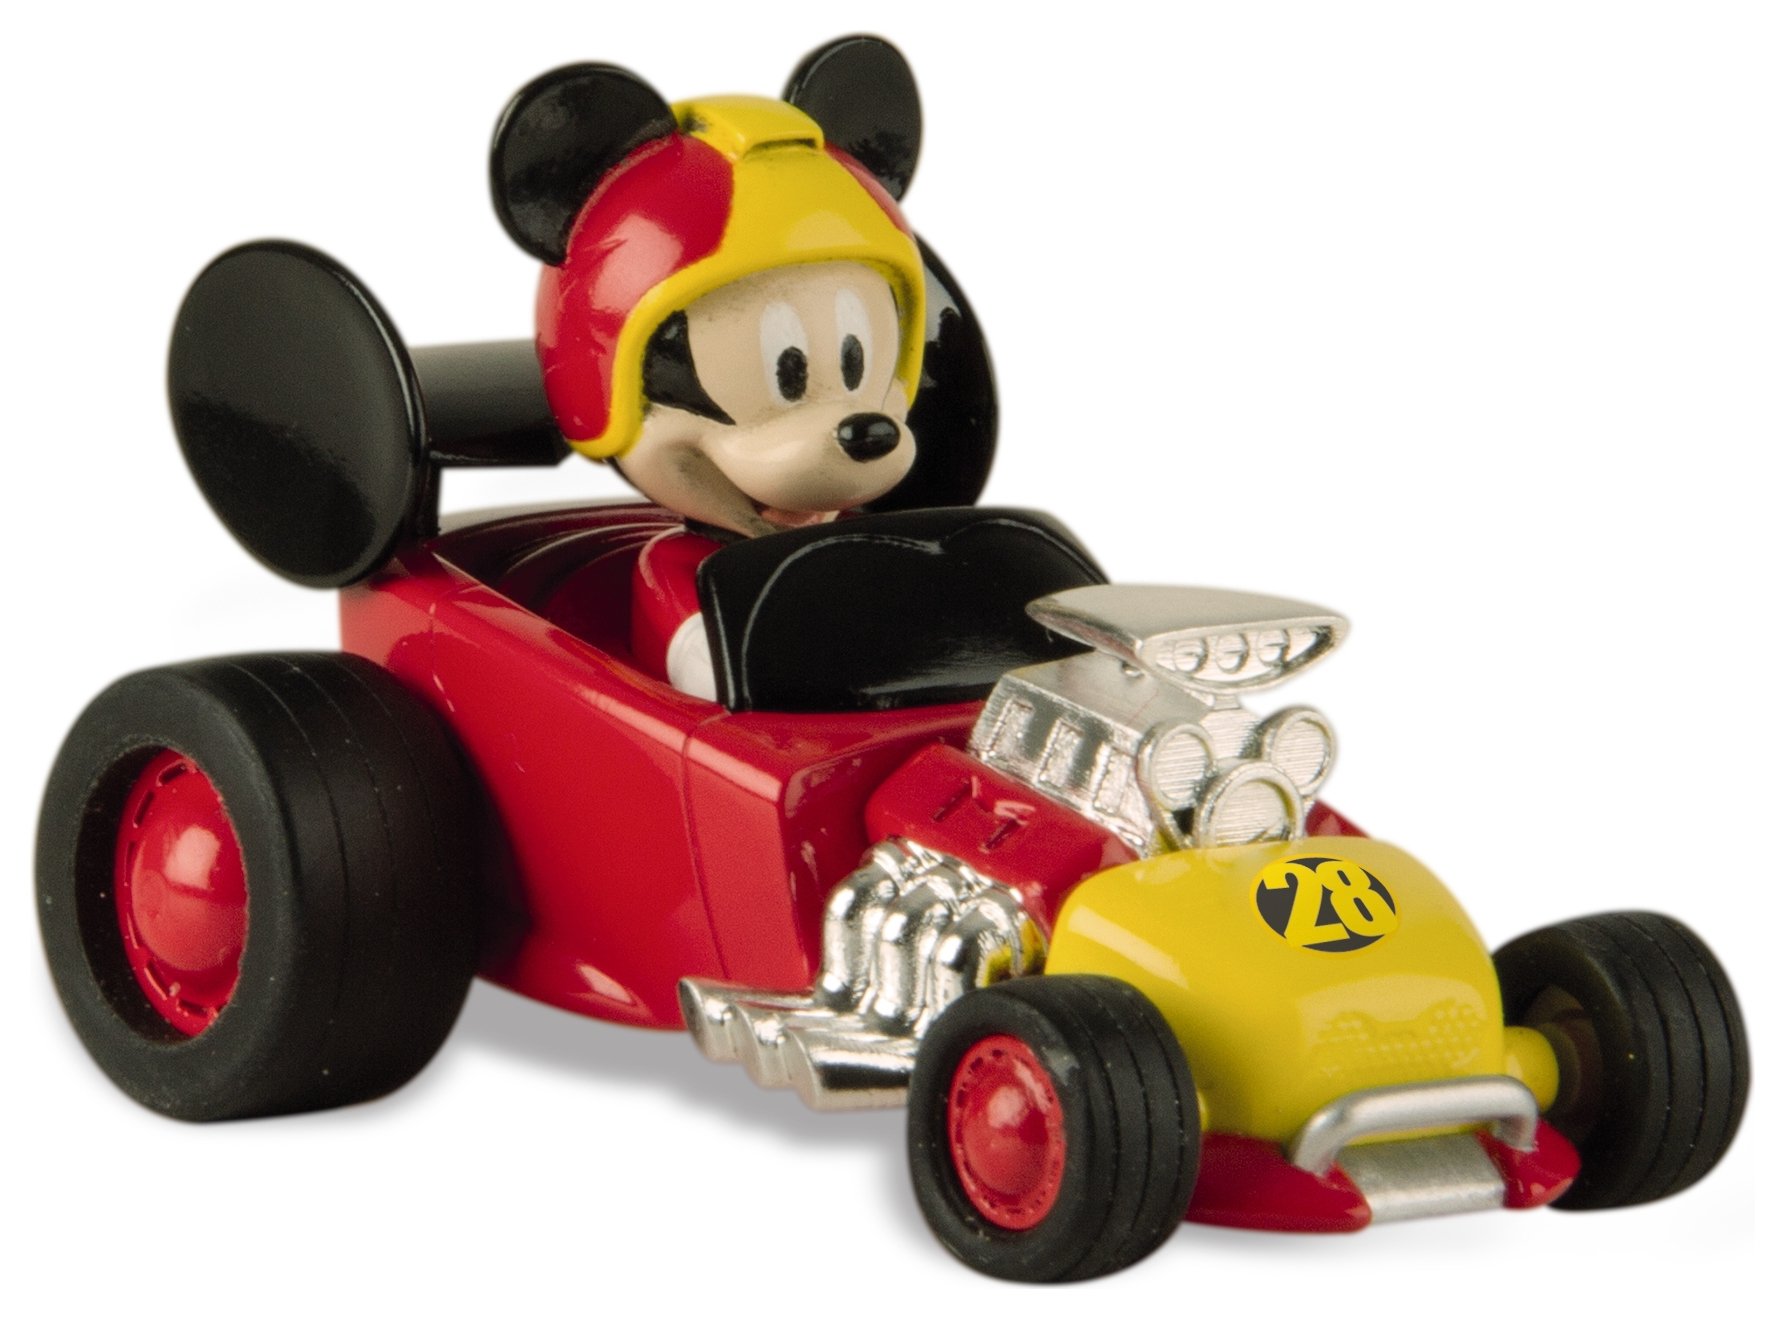 Mickey and the Roadster Racers Mini Vehicles - 2 Pack